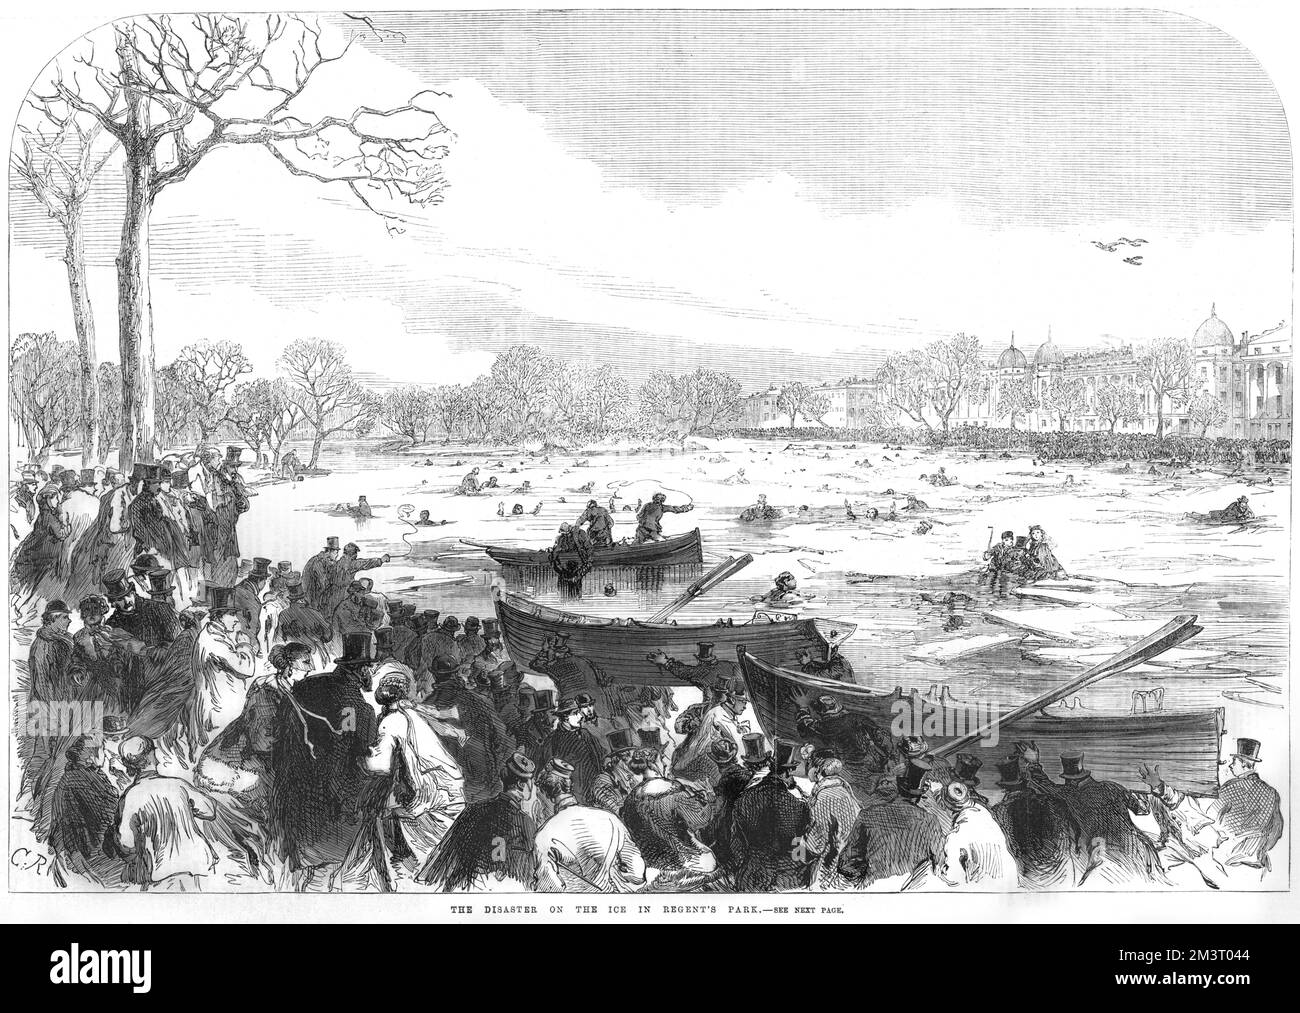 The disaster on the ice in Regent's Park, London, 15th January 1867. Several hundred people were skating or sliding on the ice of the lake when it broke so suddenly and unexpectedly that a great number were plunged into the water, and over 40 people drowned.     Date: 15th January 1867 Stock Photo